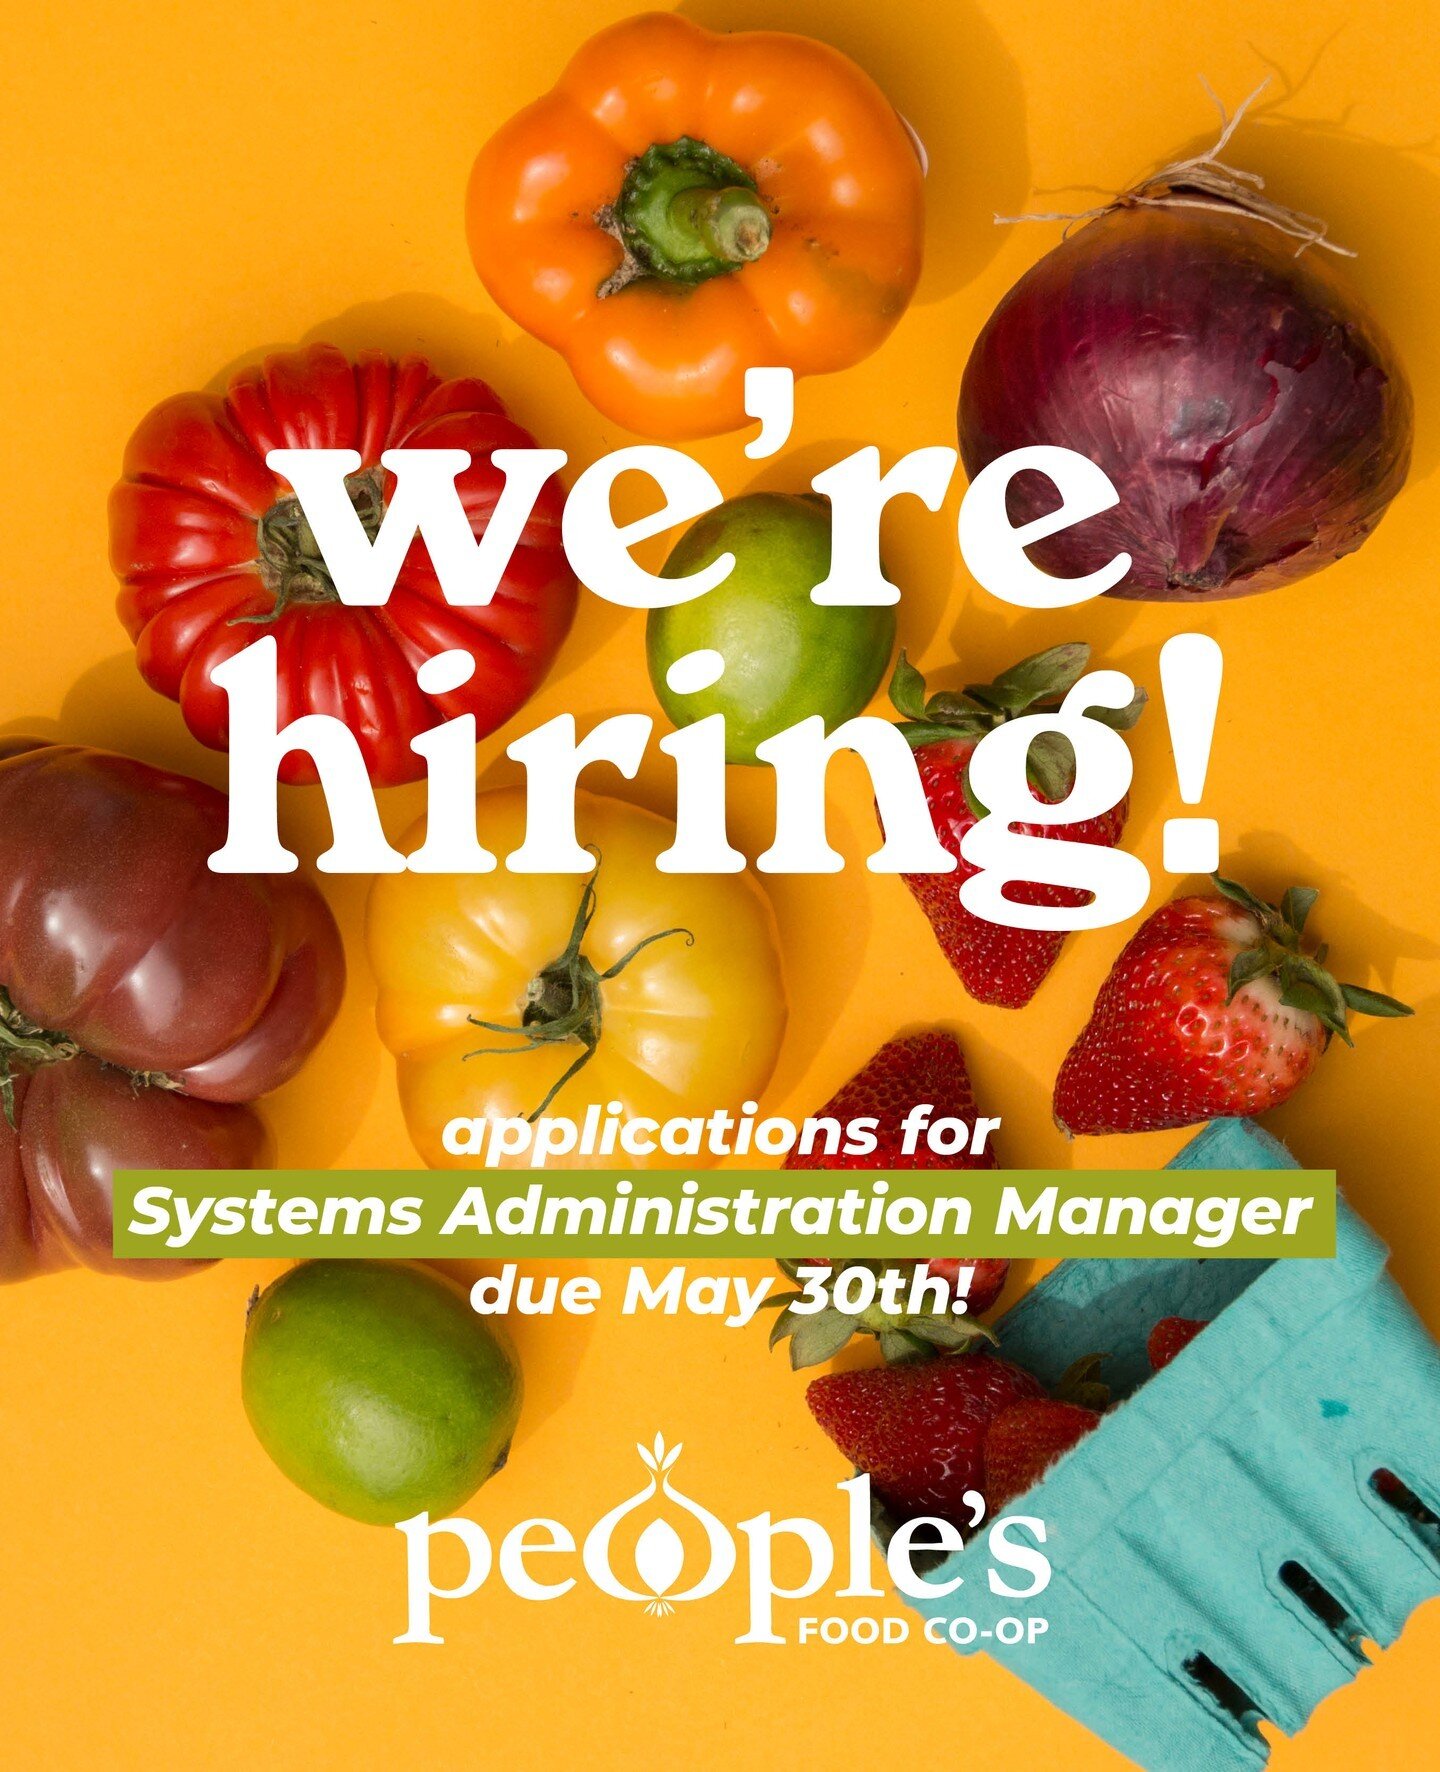 We're hiring a Systems Administration Manager! 🖥️💵 The SAM (as we like to call it) supports our staff with our technology systems, helps keep our tech systems in working order and up to date, and also administers staff benefits and payroll. More in